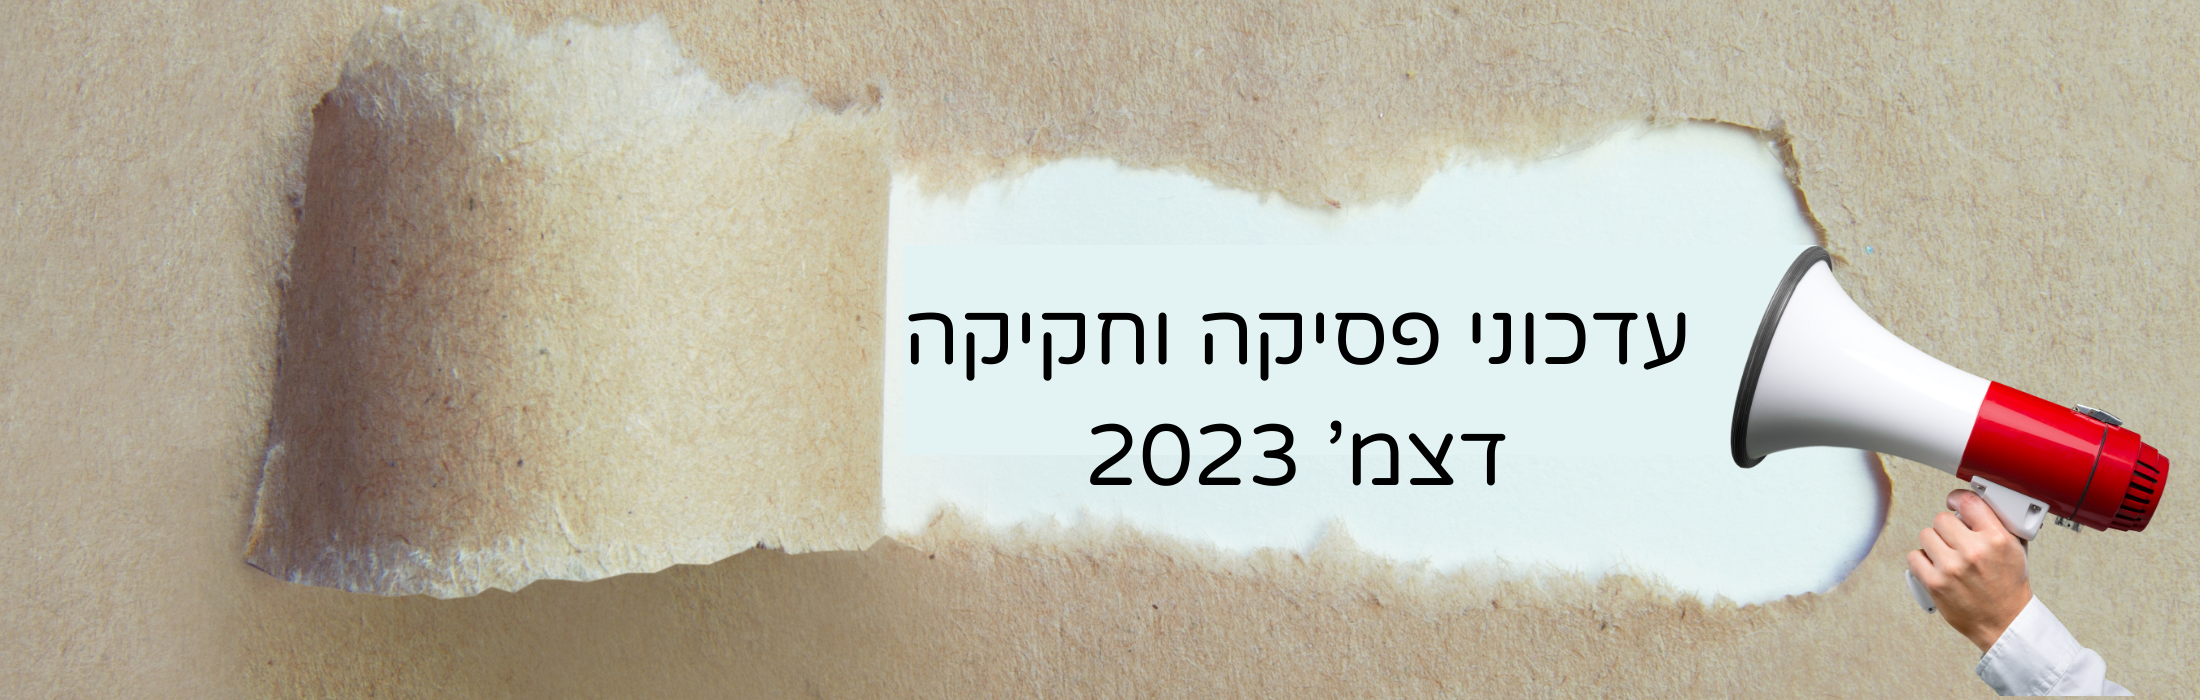 https://www.kolhamas.co.il/wp-content/uploads/2023/12/עותק-של-עותק-של-עותק-של-קול-המס-2200-x-700-פיקסל-3.png